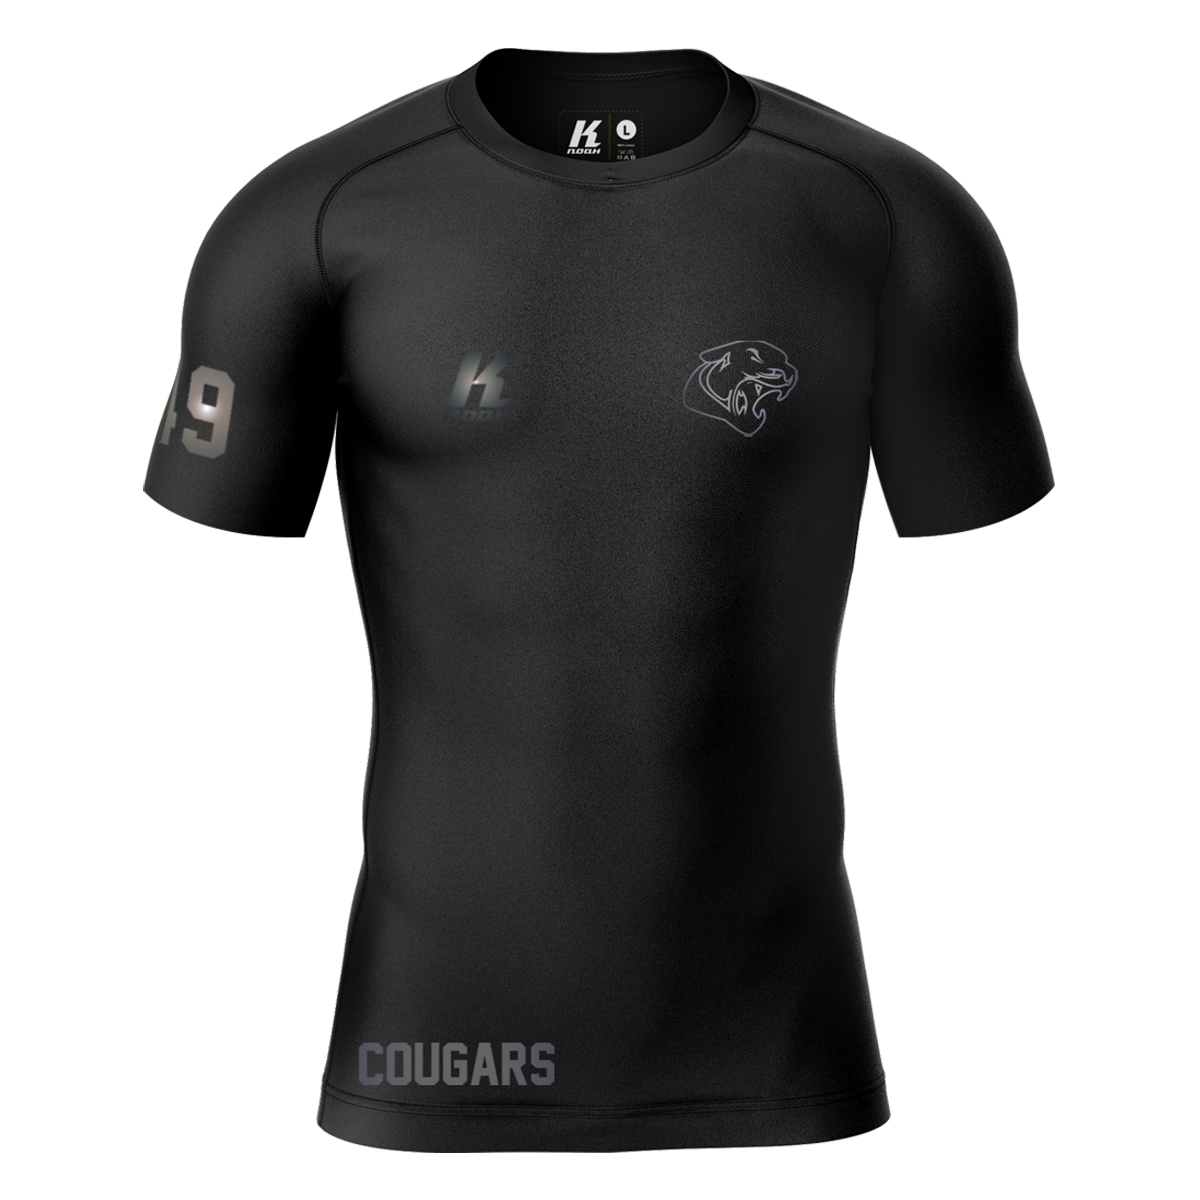 Cougars "Blackline" K.Tech Compression Shortsleeve Shirt with Playernumber/Initials